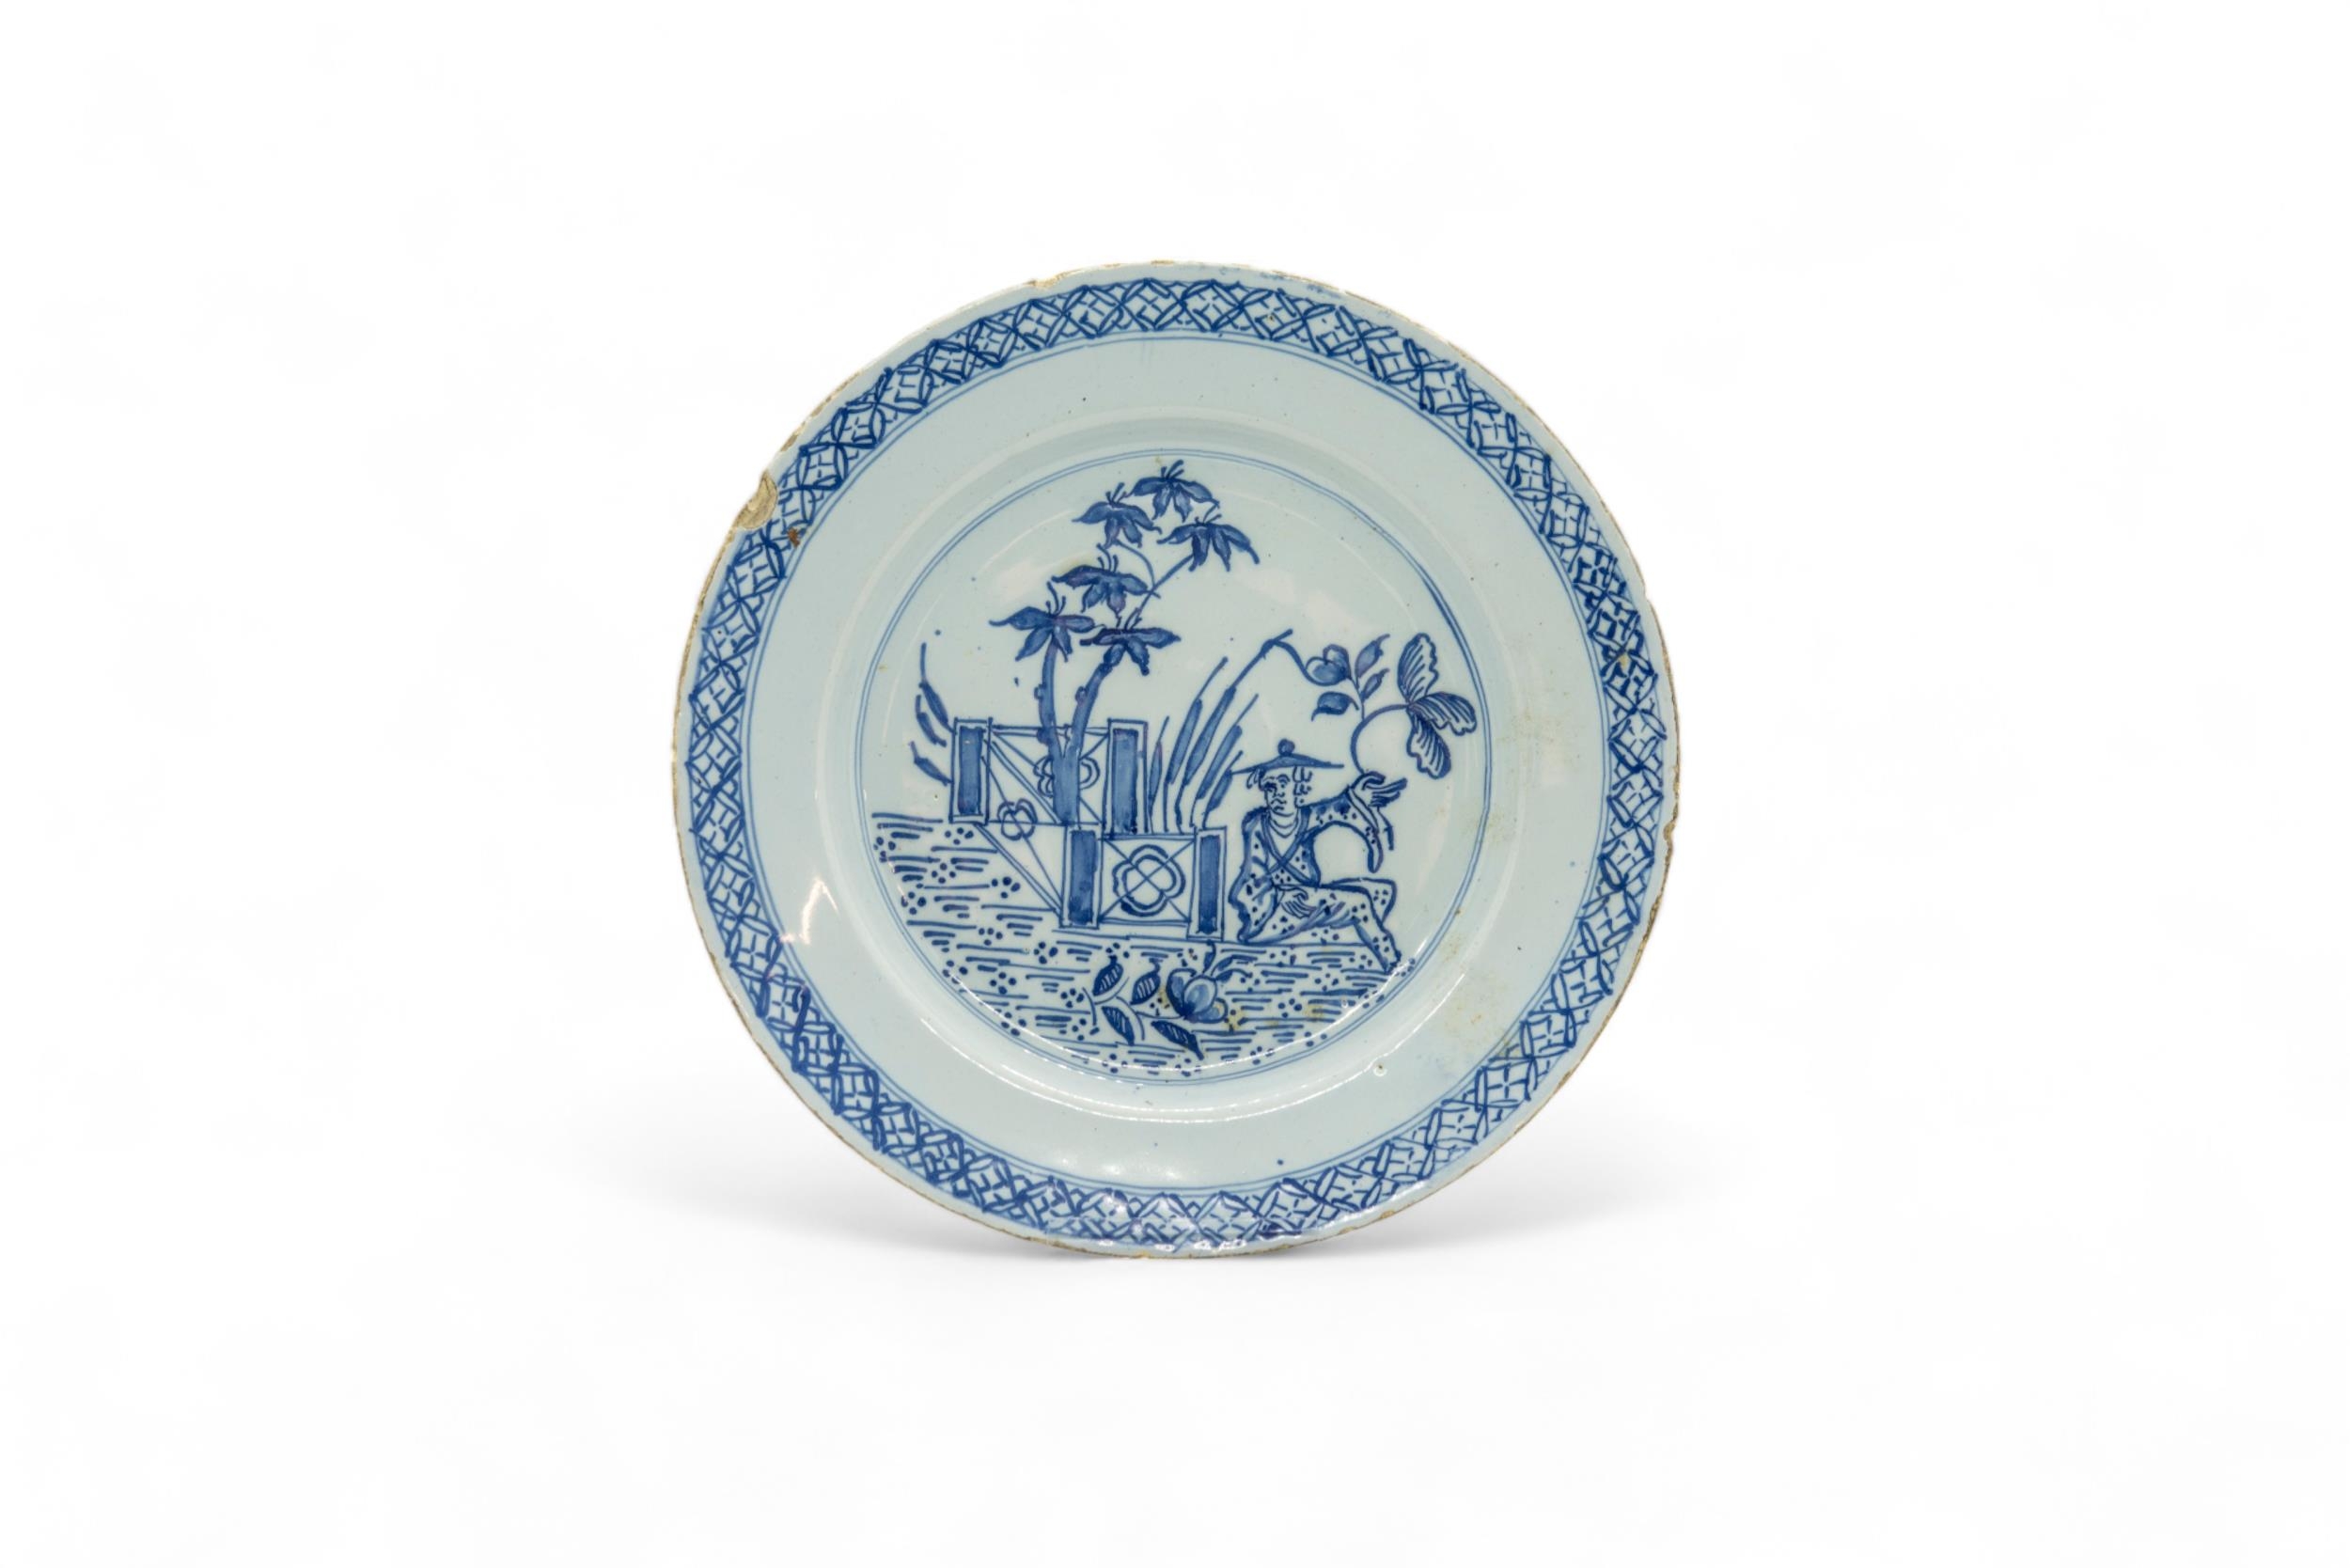 TEN DELFT PLATES 18th Century, including two with bianco sopro bianco decoration and one with a - Image 5 of 10